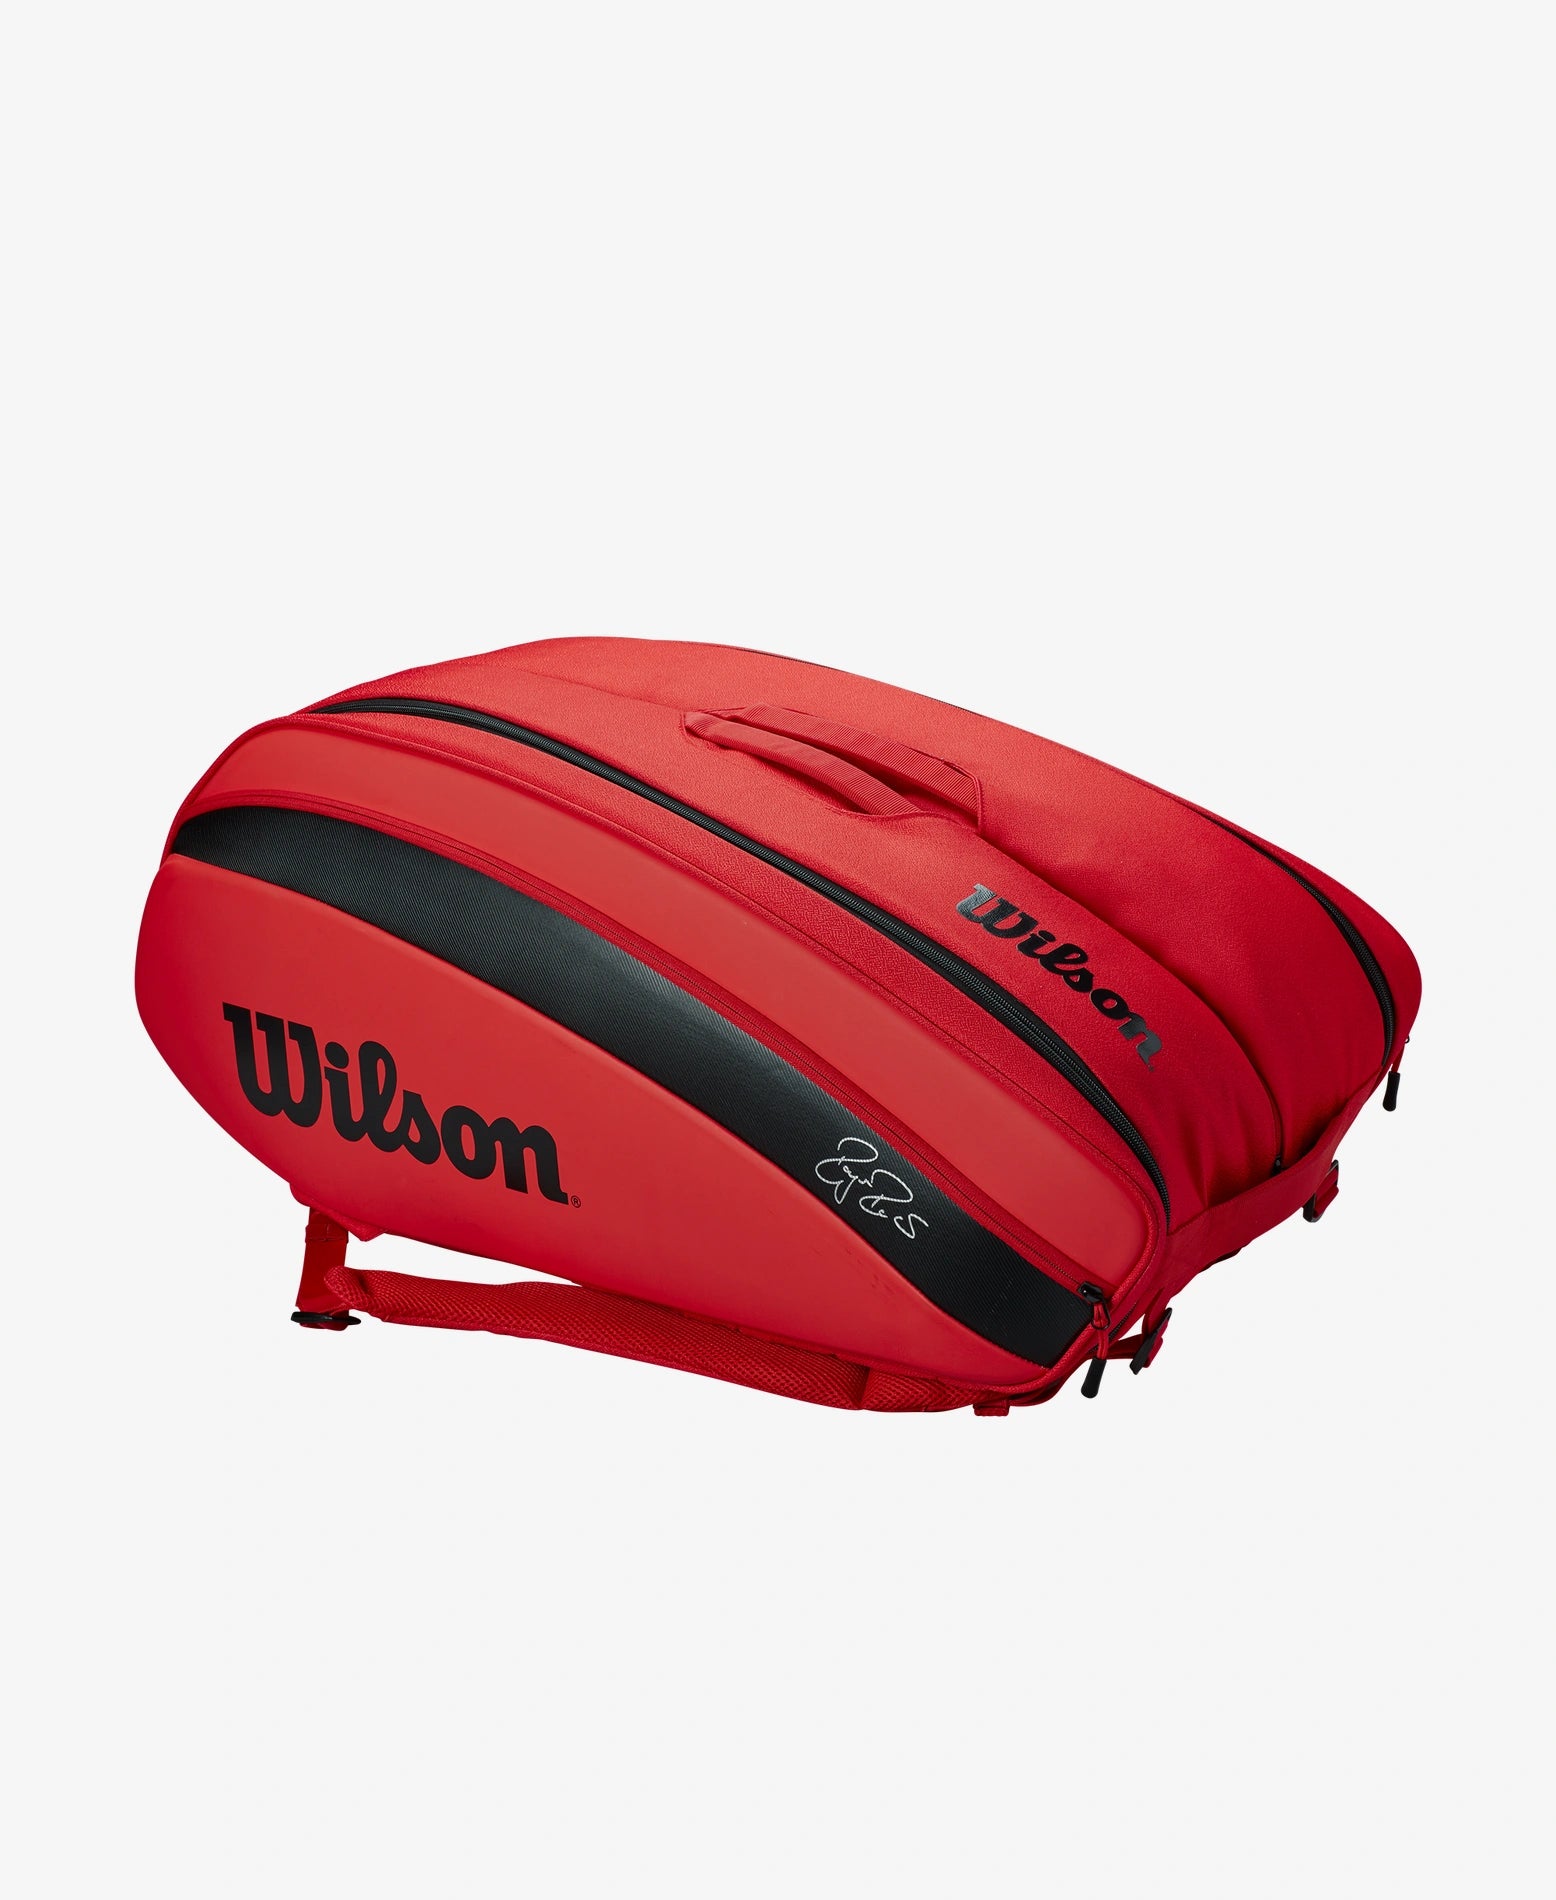 The Wilson Roger Federer DNA 12 Pack Racket Bag in Infrared colour which is available for sale at GSM Sports.      